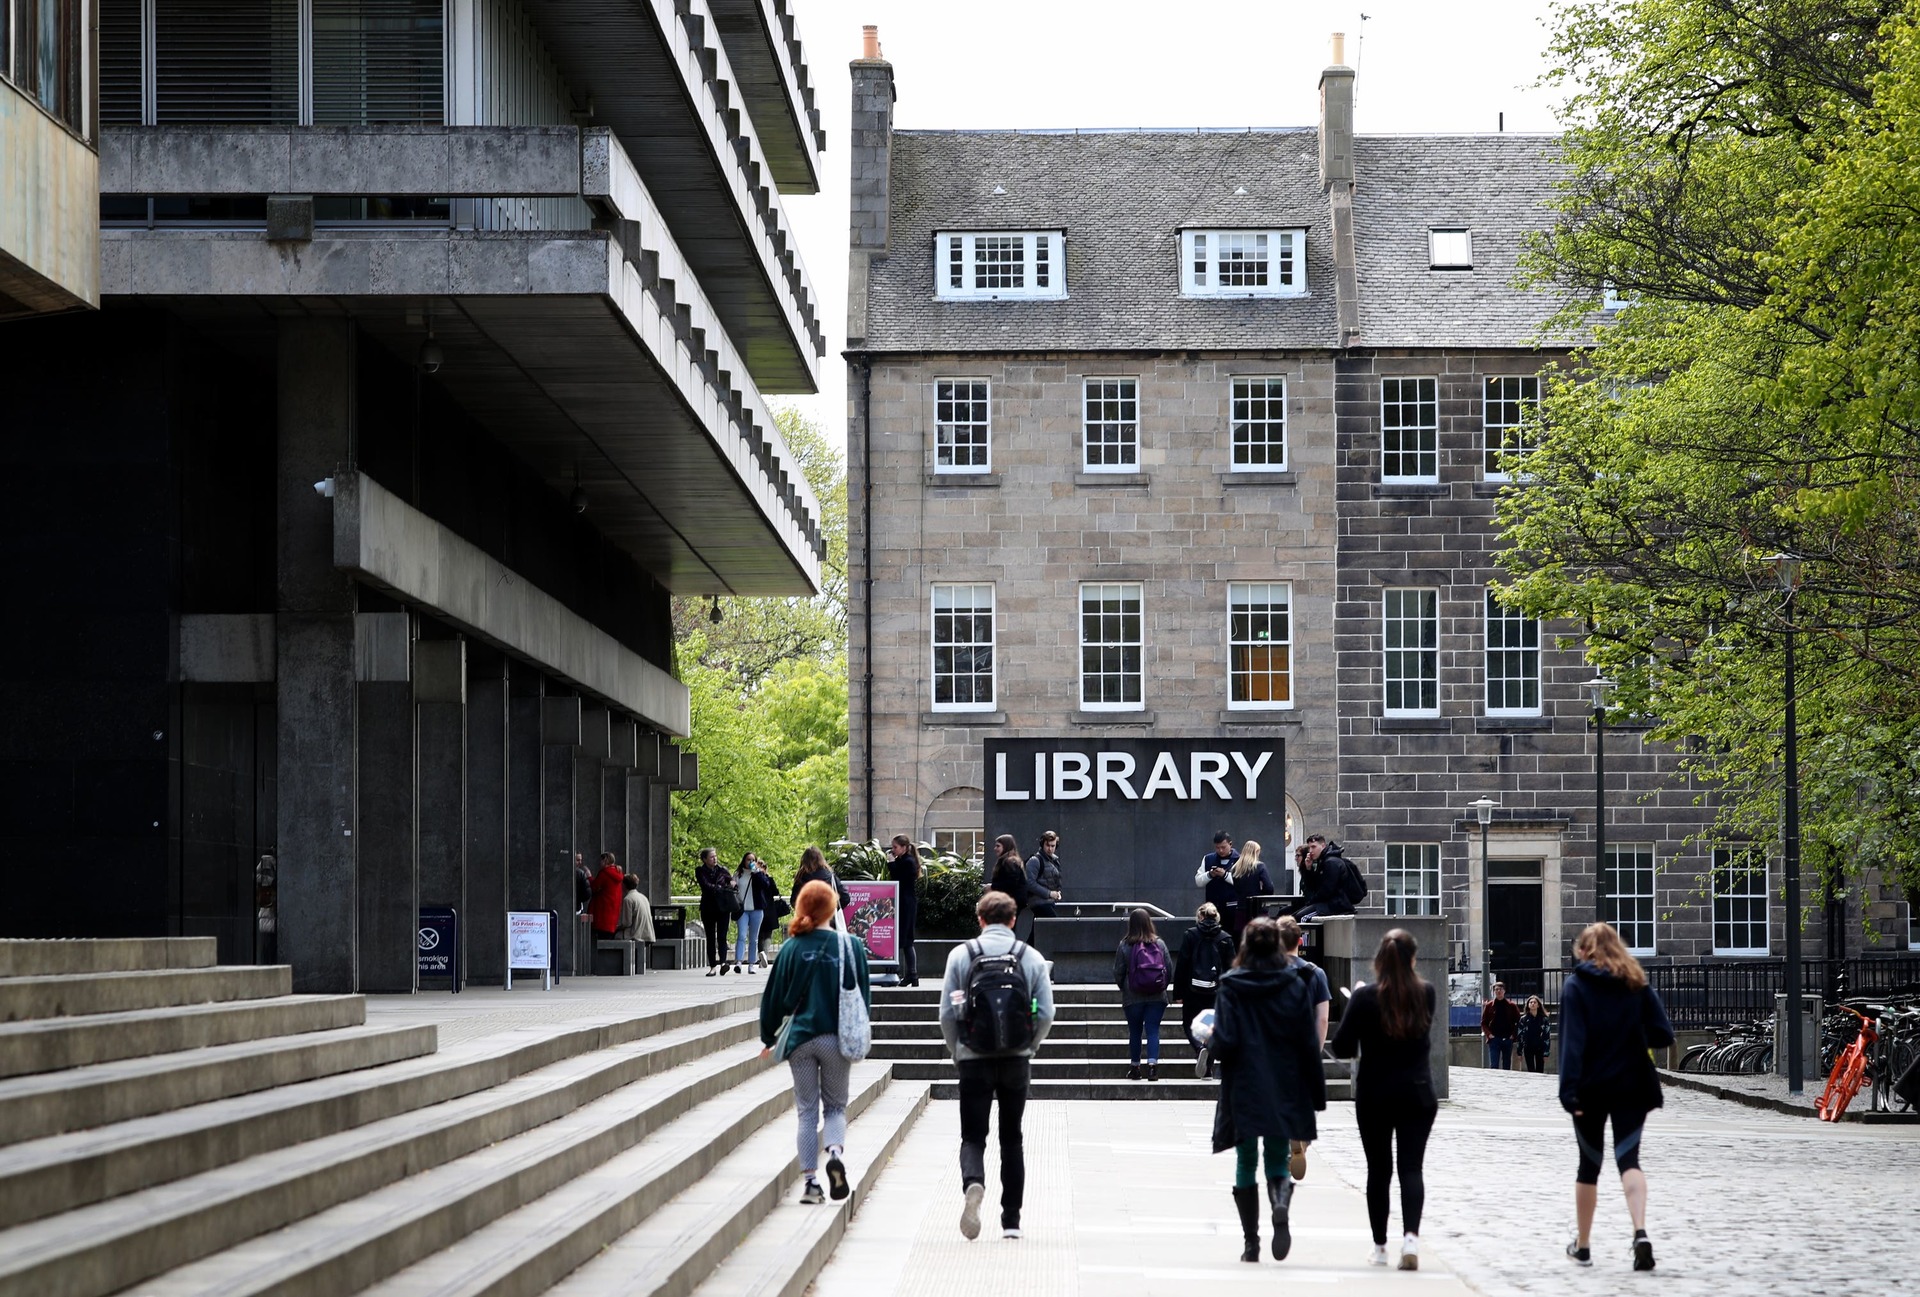 Edinburgh students had the lowest monthly income according to the research